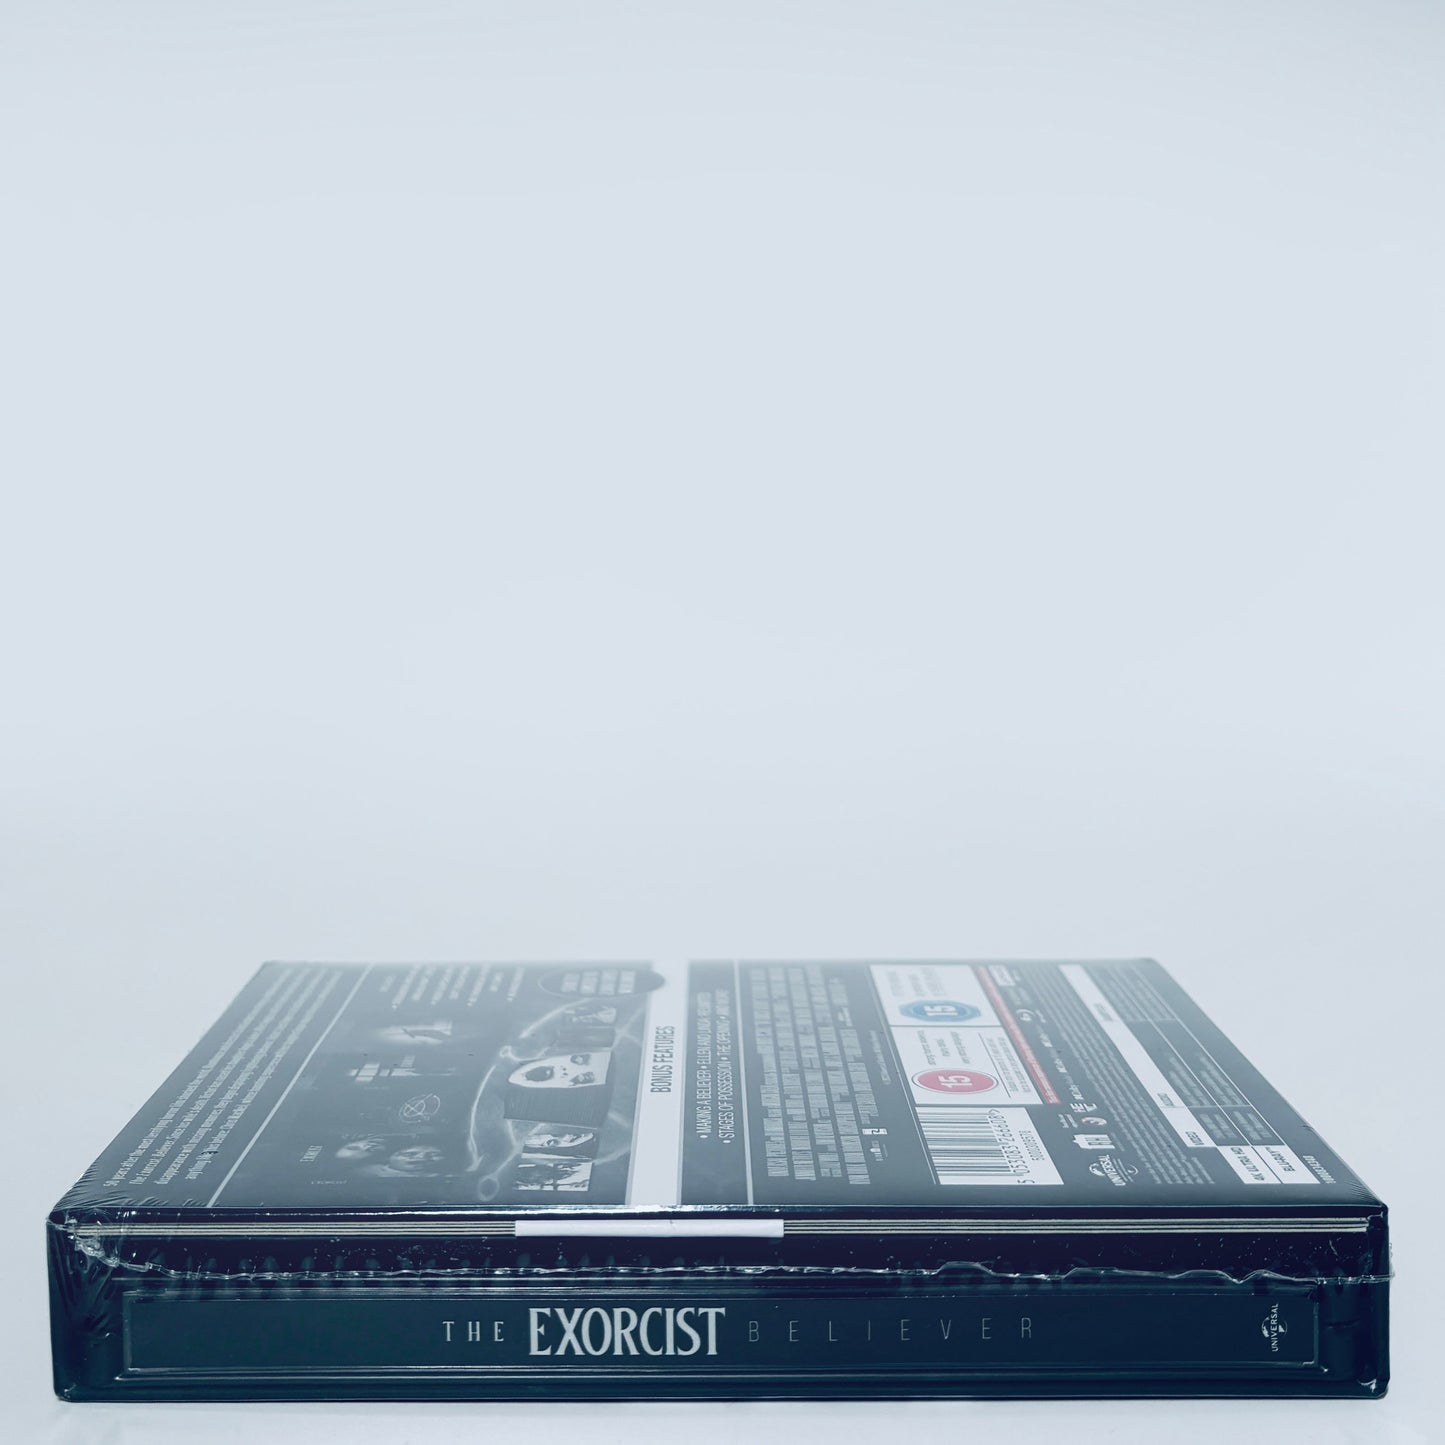 The Exorcist Believer 2-Disc 4K Ultra HD Blu-ray SteelBook Universal Limited